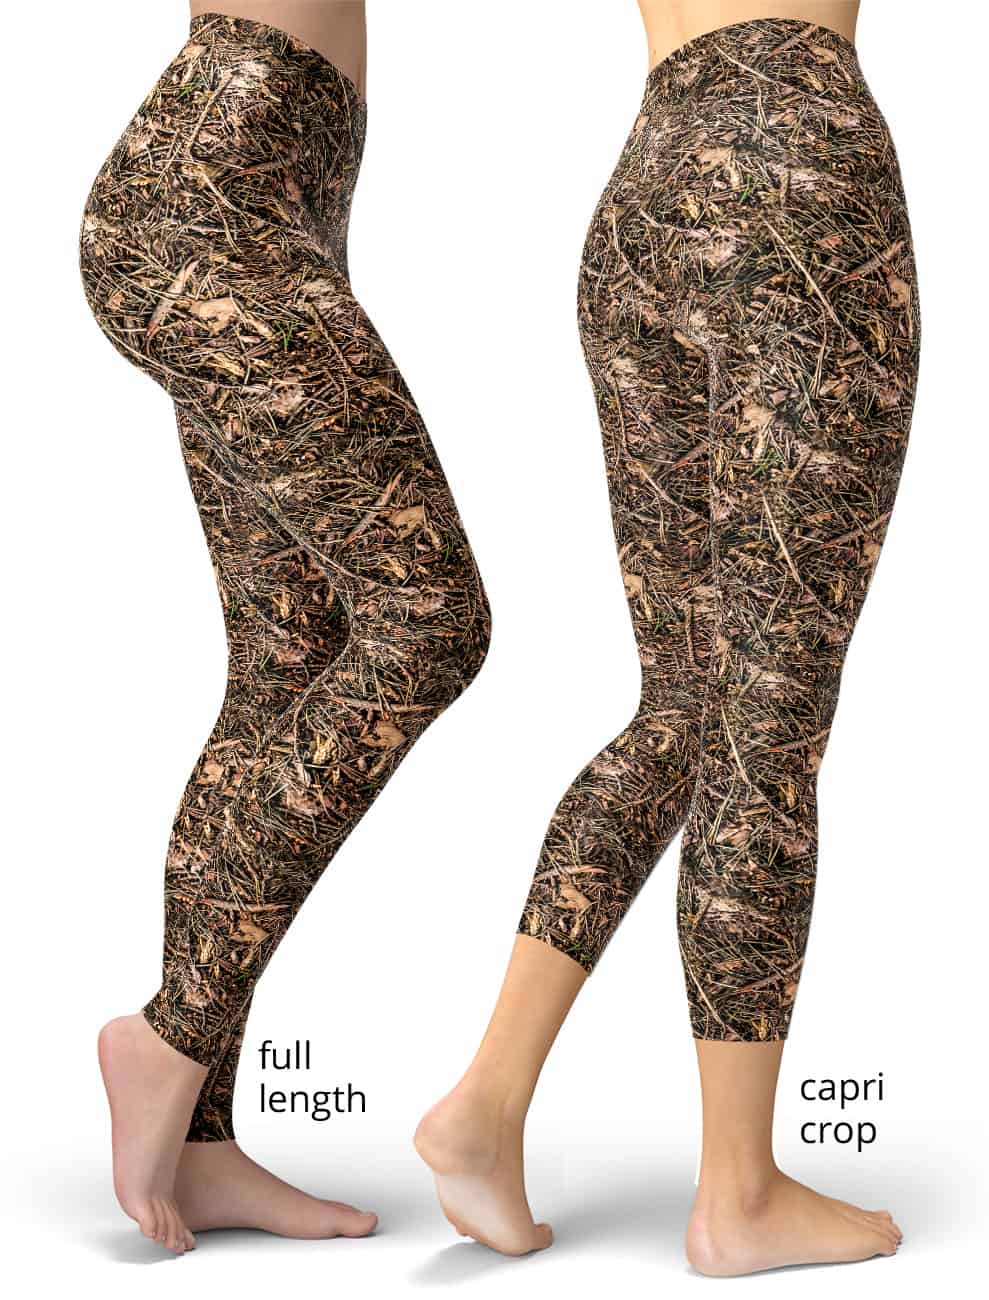 Stretchable Dachshund Camo Patterned Leggings